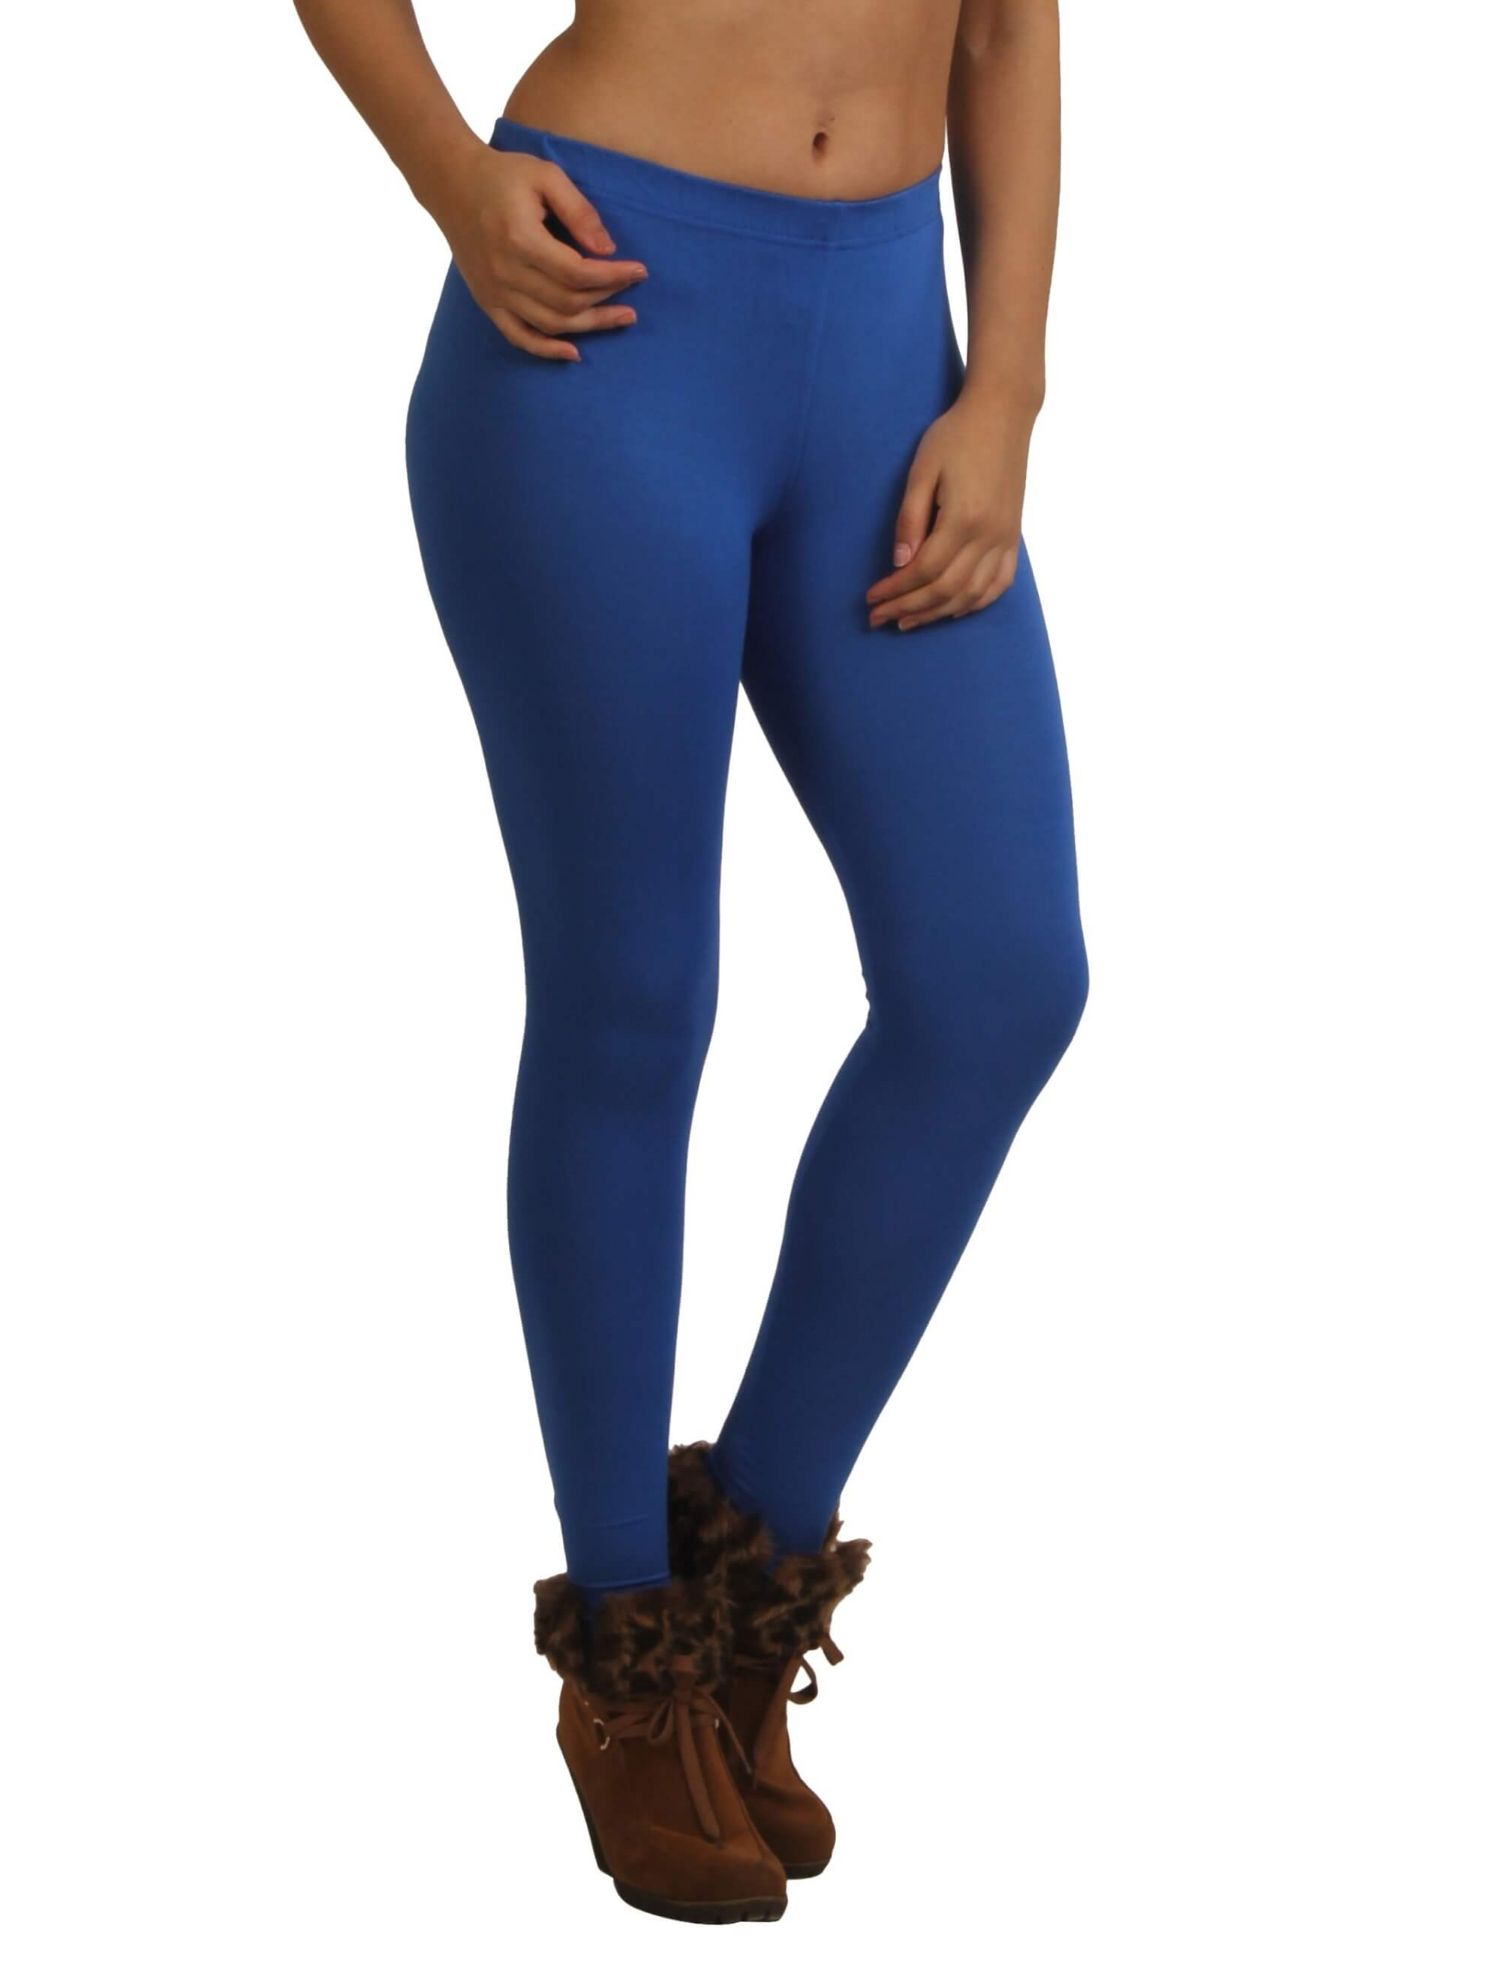 https://frenchtrendz.com/images/thumbs/0000972_frenchtrendz-modal-spandex-royal-blue-ankle-leggings.jpeg